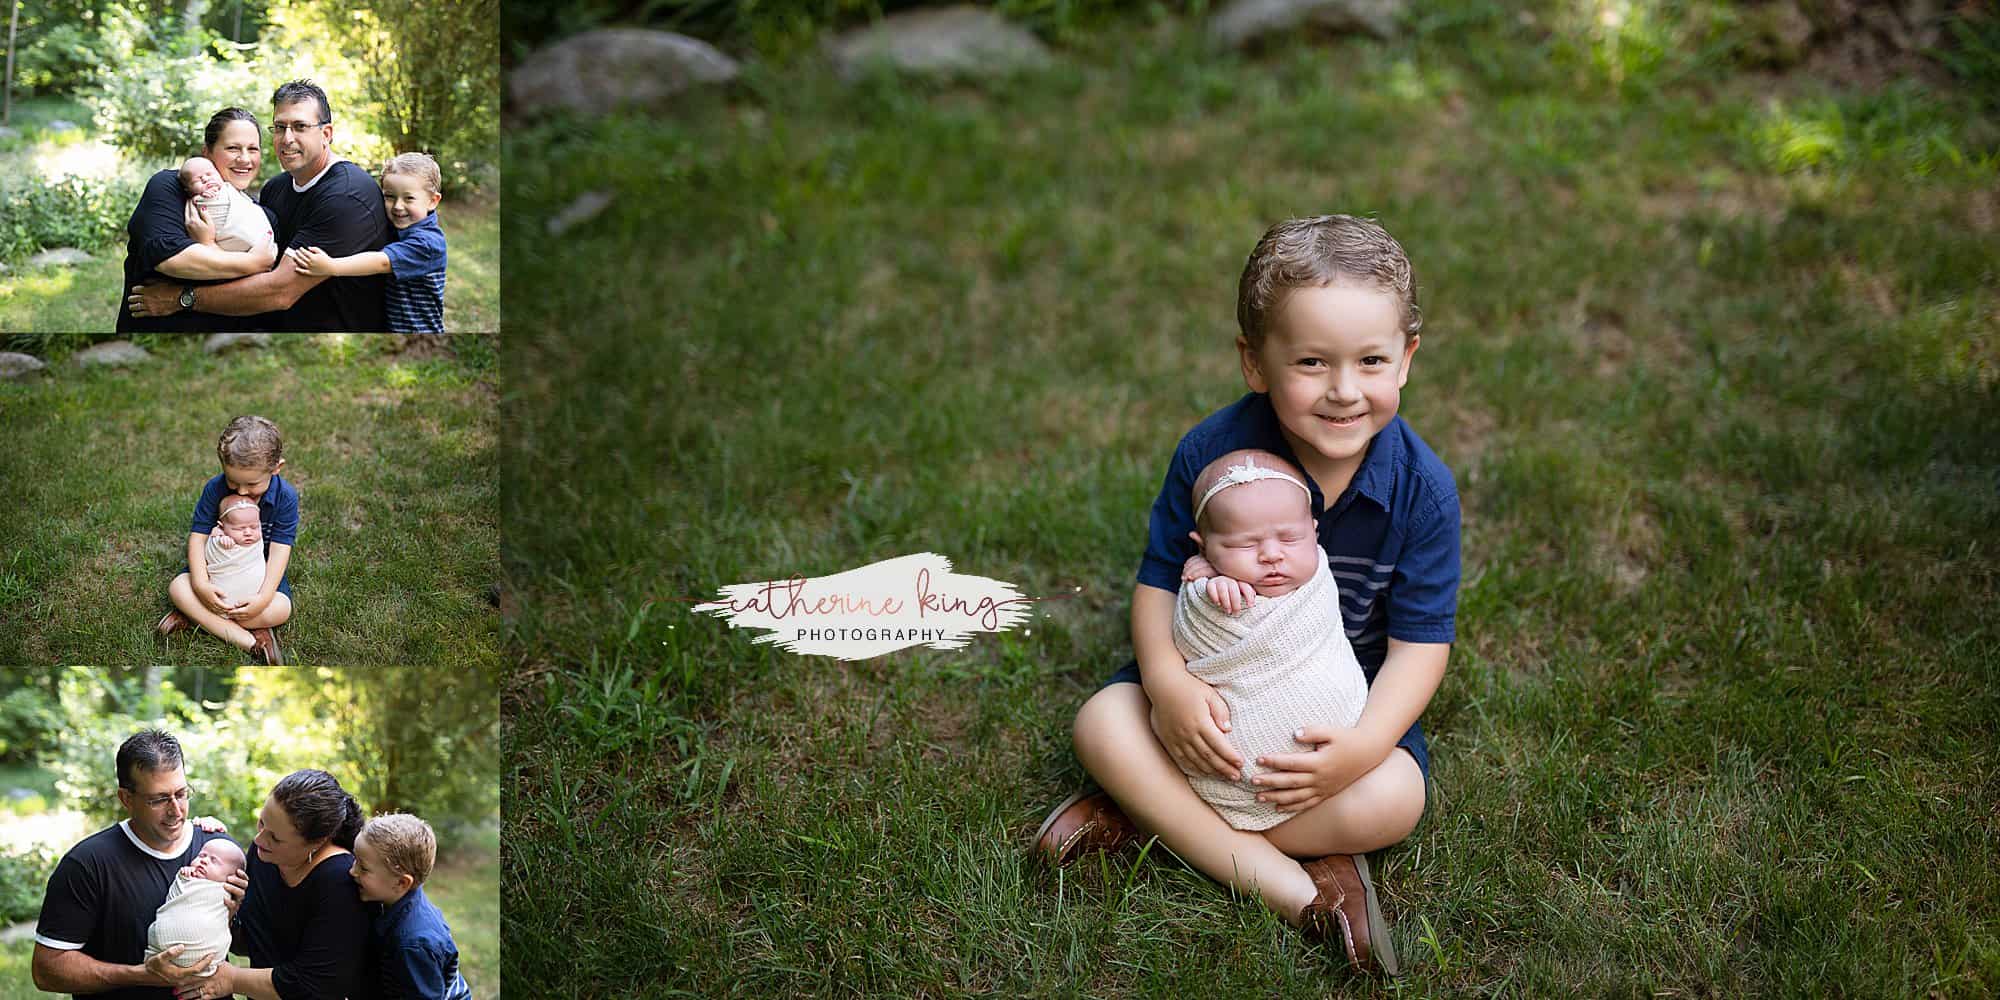 Outdoor newborn mini photography session in Madison, CT